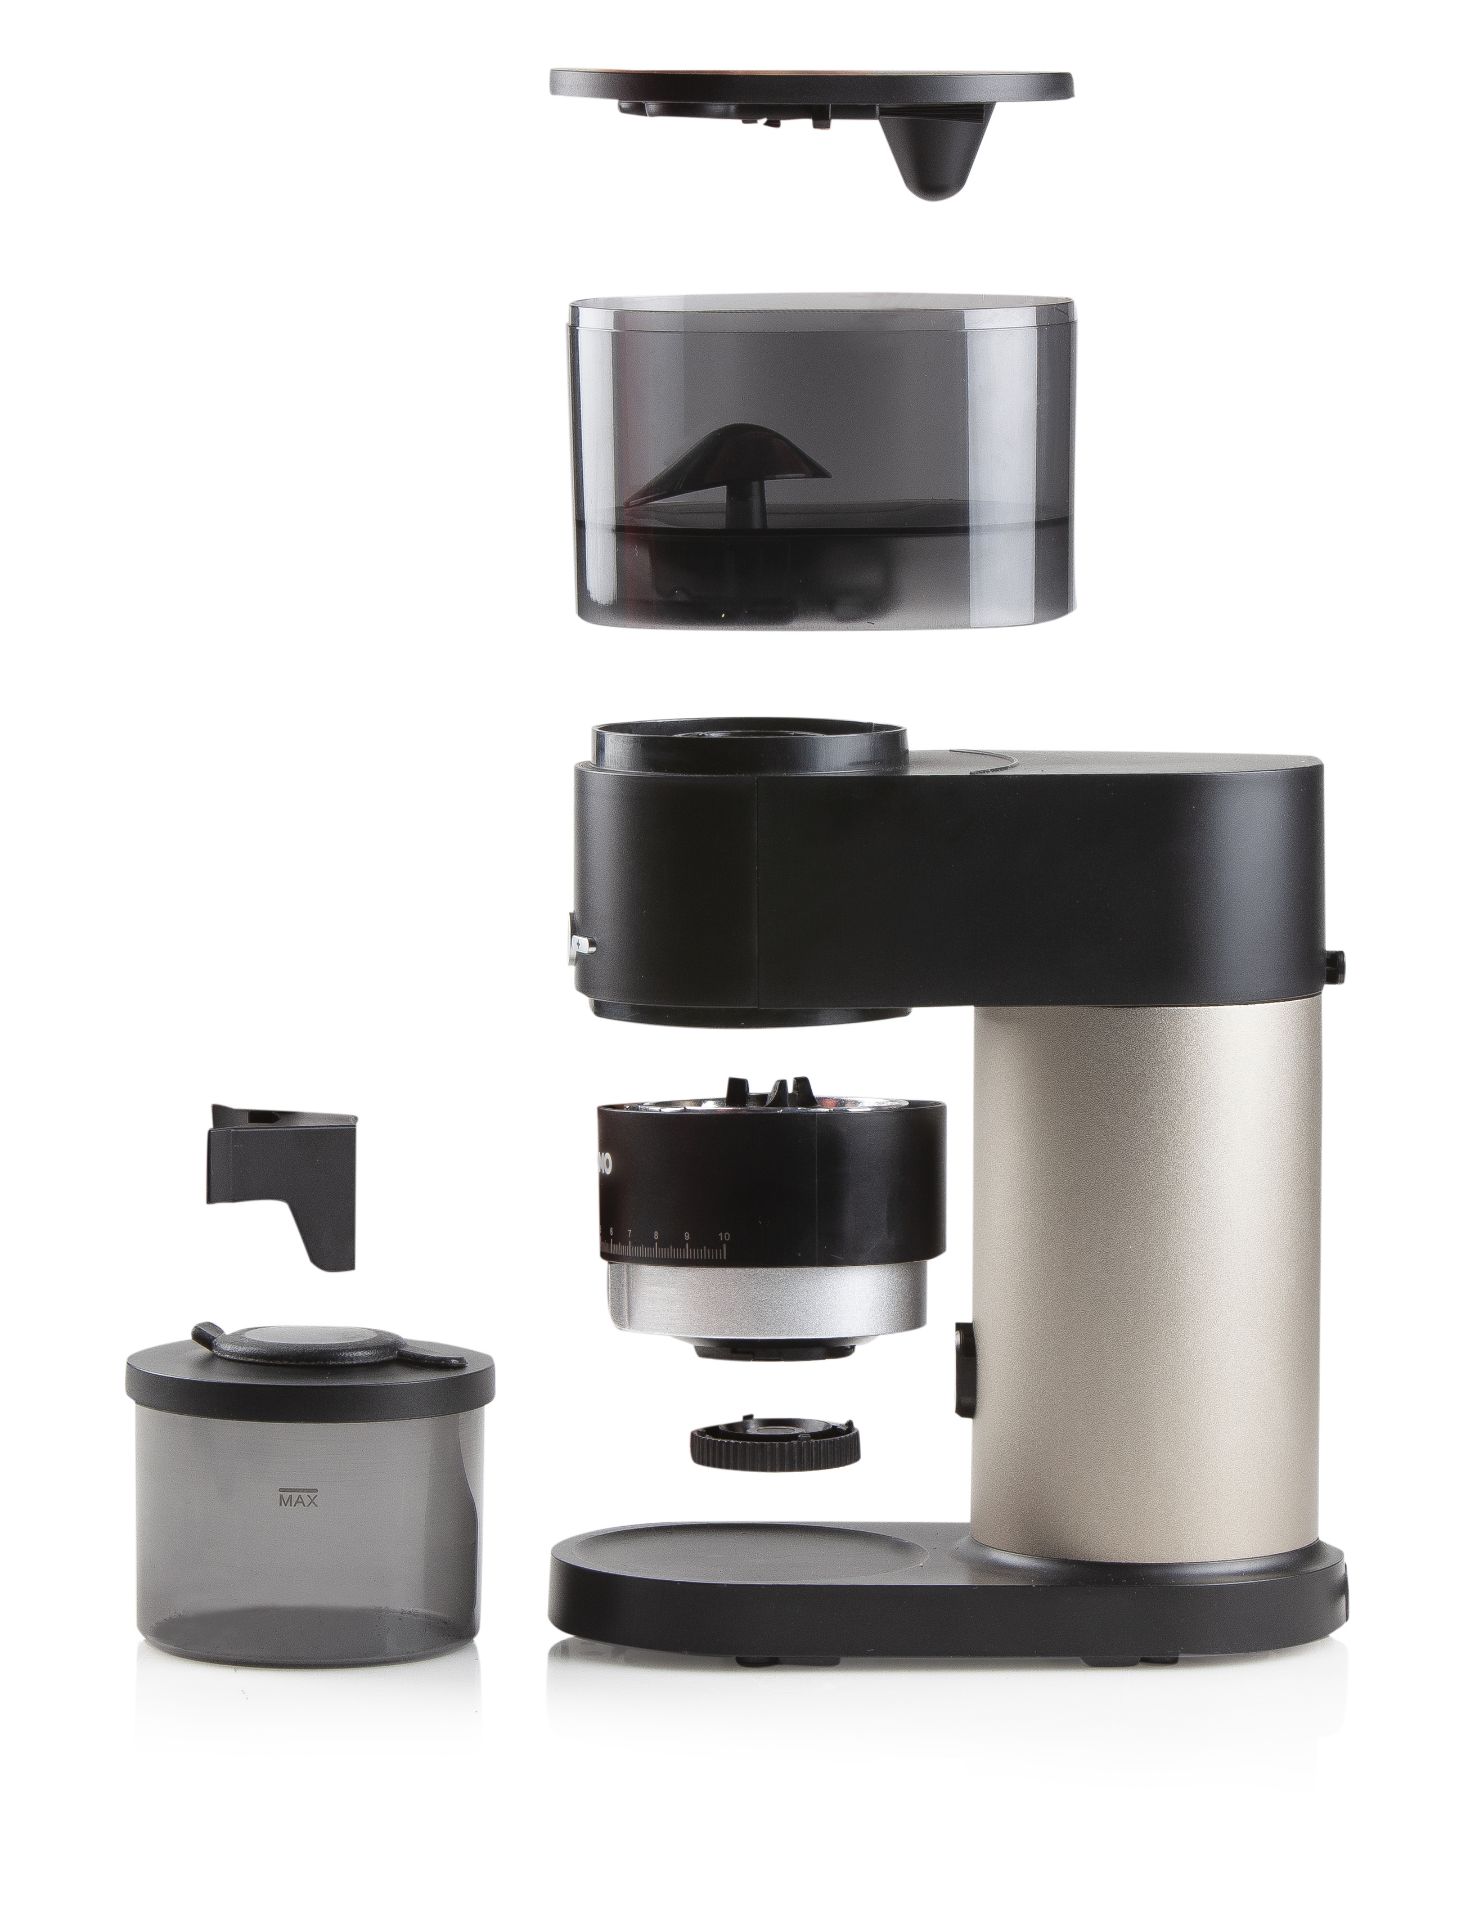 4 x DOMO Barista Style Coffee Grinder Black SS 120g Urban RRP £ 150 total £ 600 - Image 3 of 10